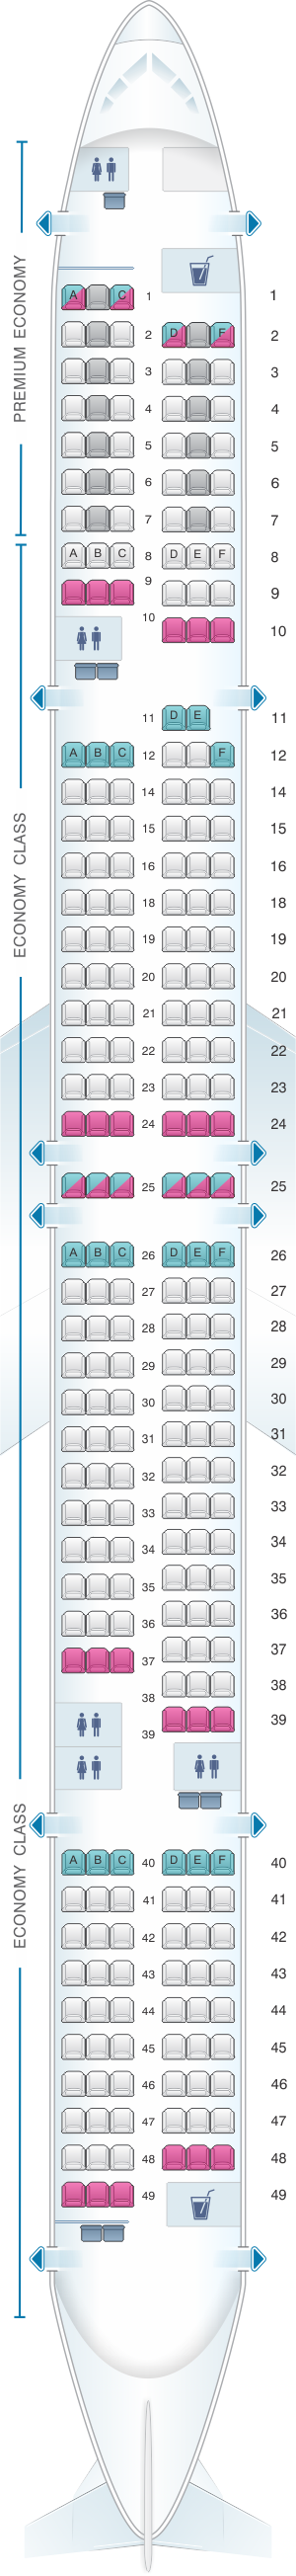 Seat map for Condor Boeing B757 300